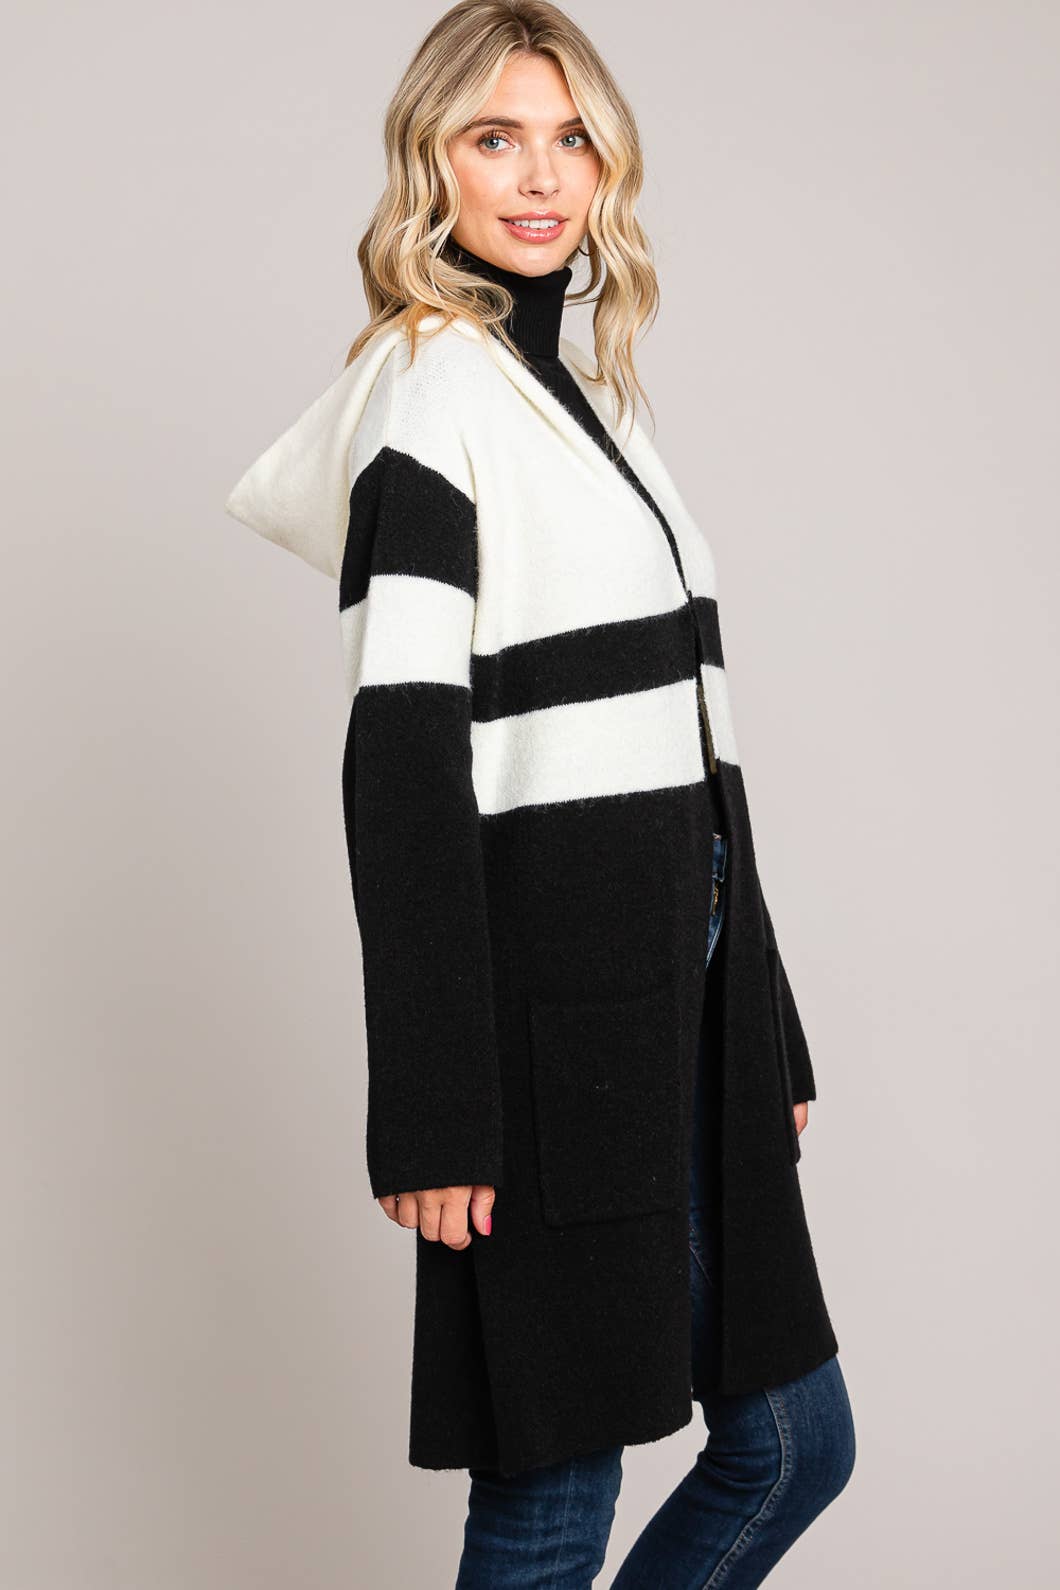 Casual Everyday Women's Black and White Hooded Cardigan